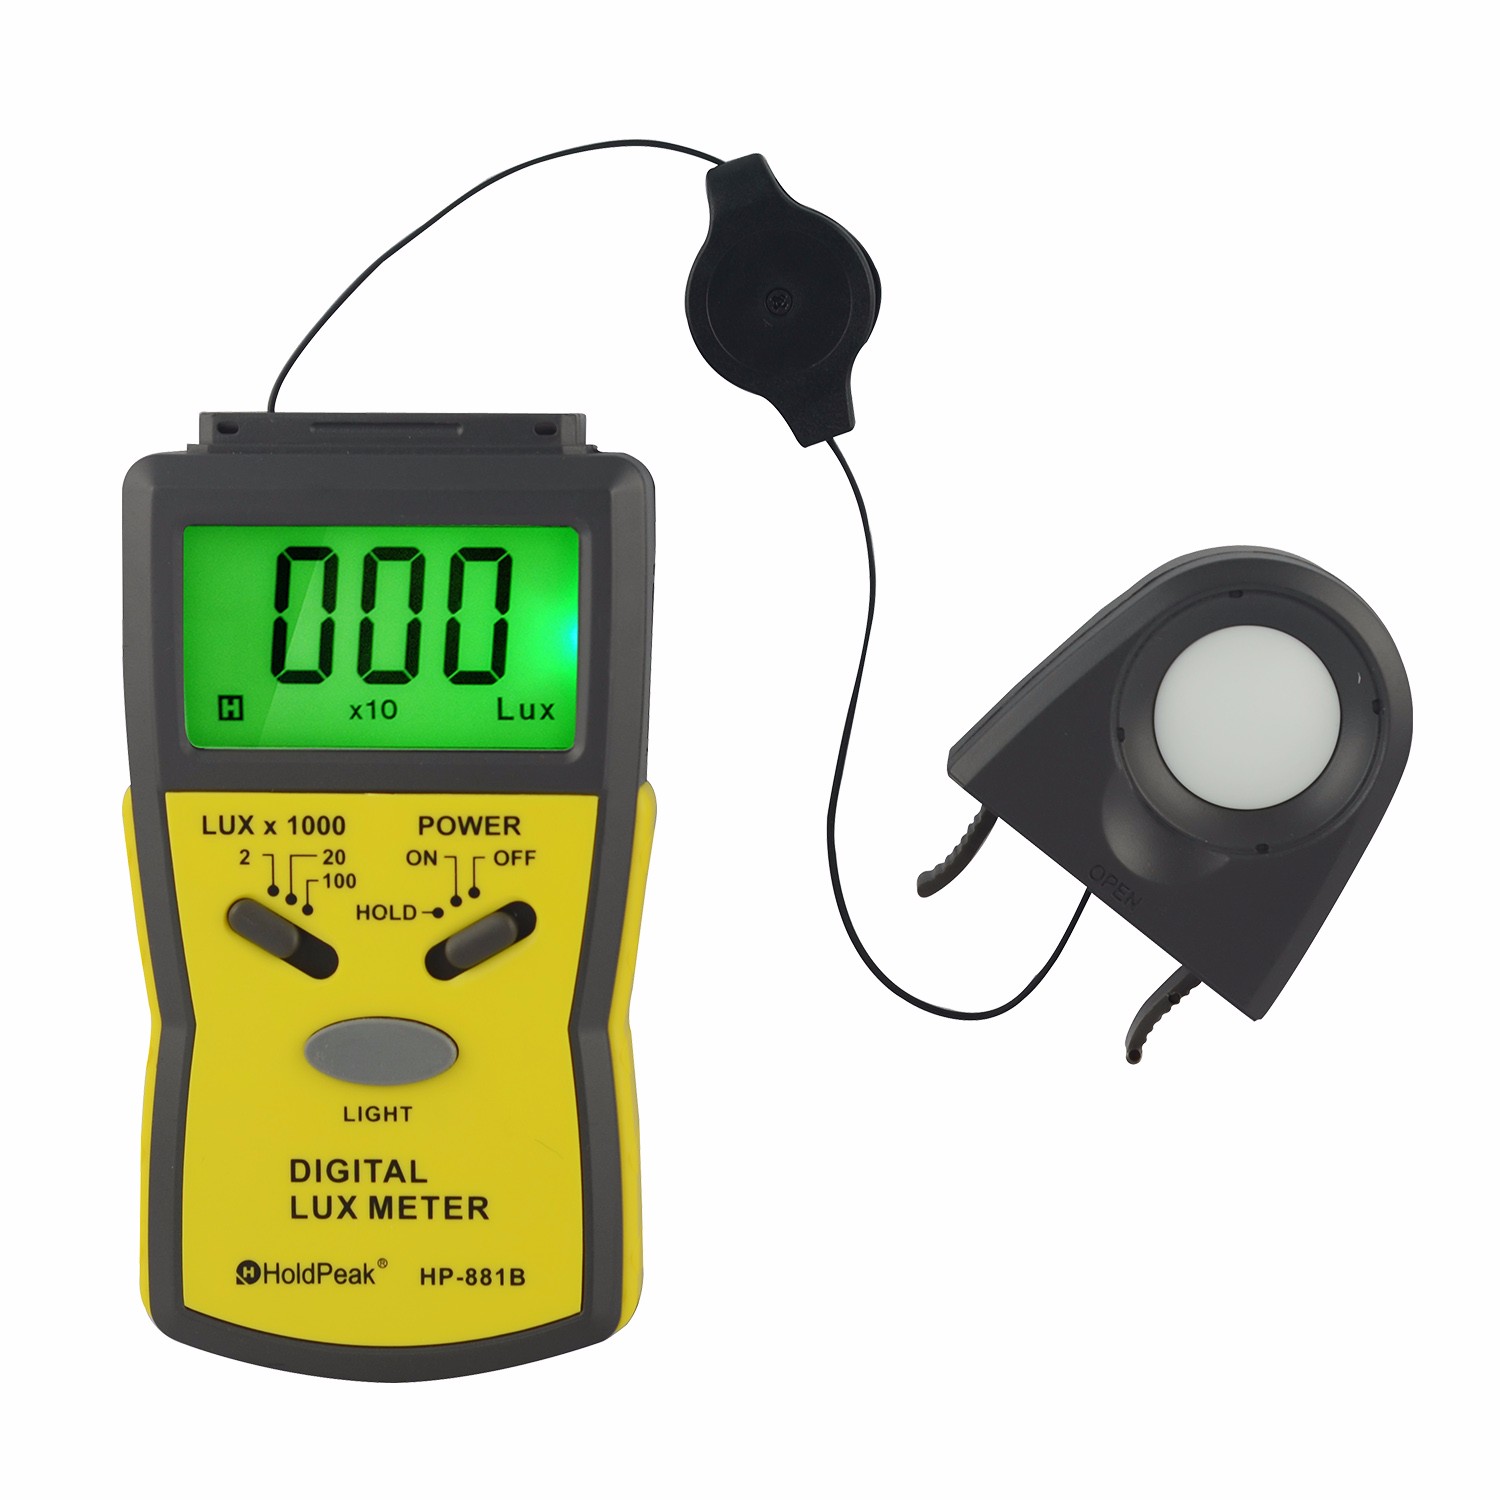 HoldPeak Wholesale digital lux meter Suppliers for physical